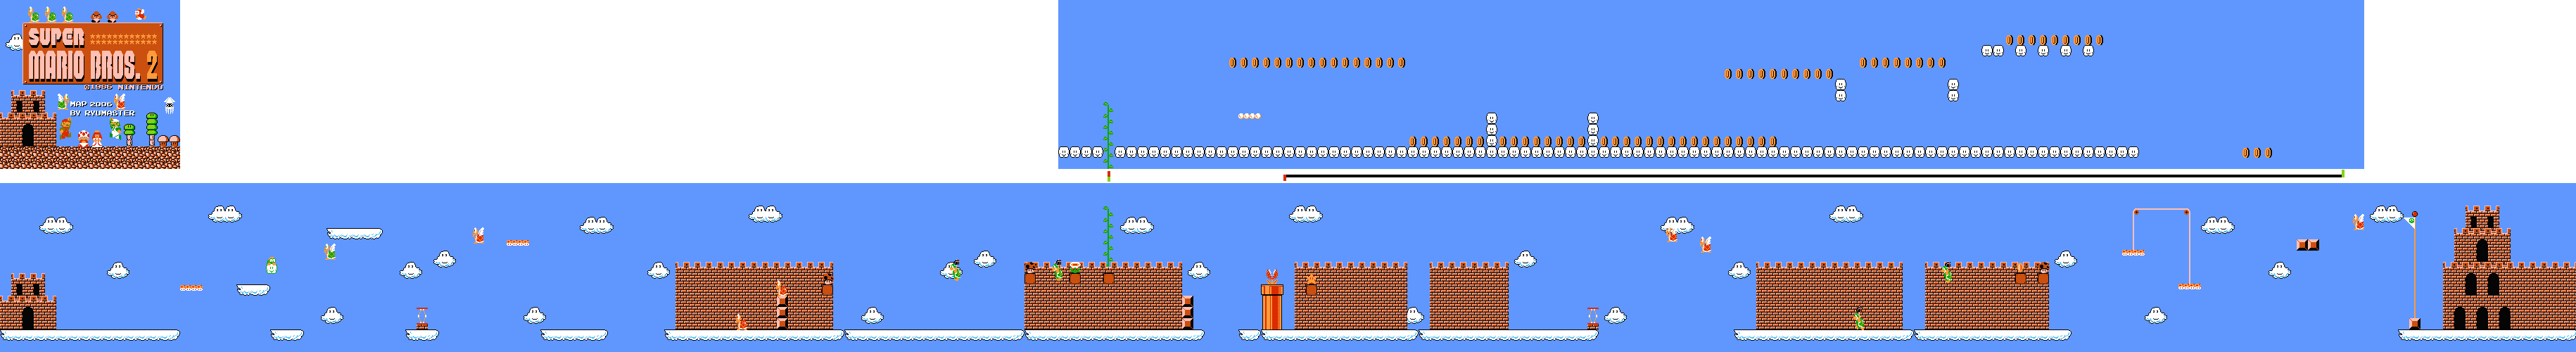 Super Mario Bros The Lost Levels Maps Of Every Stage